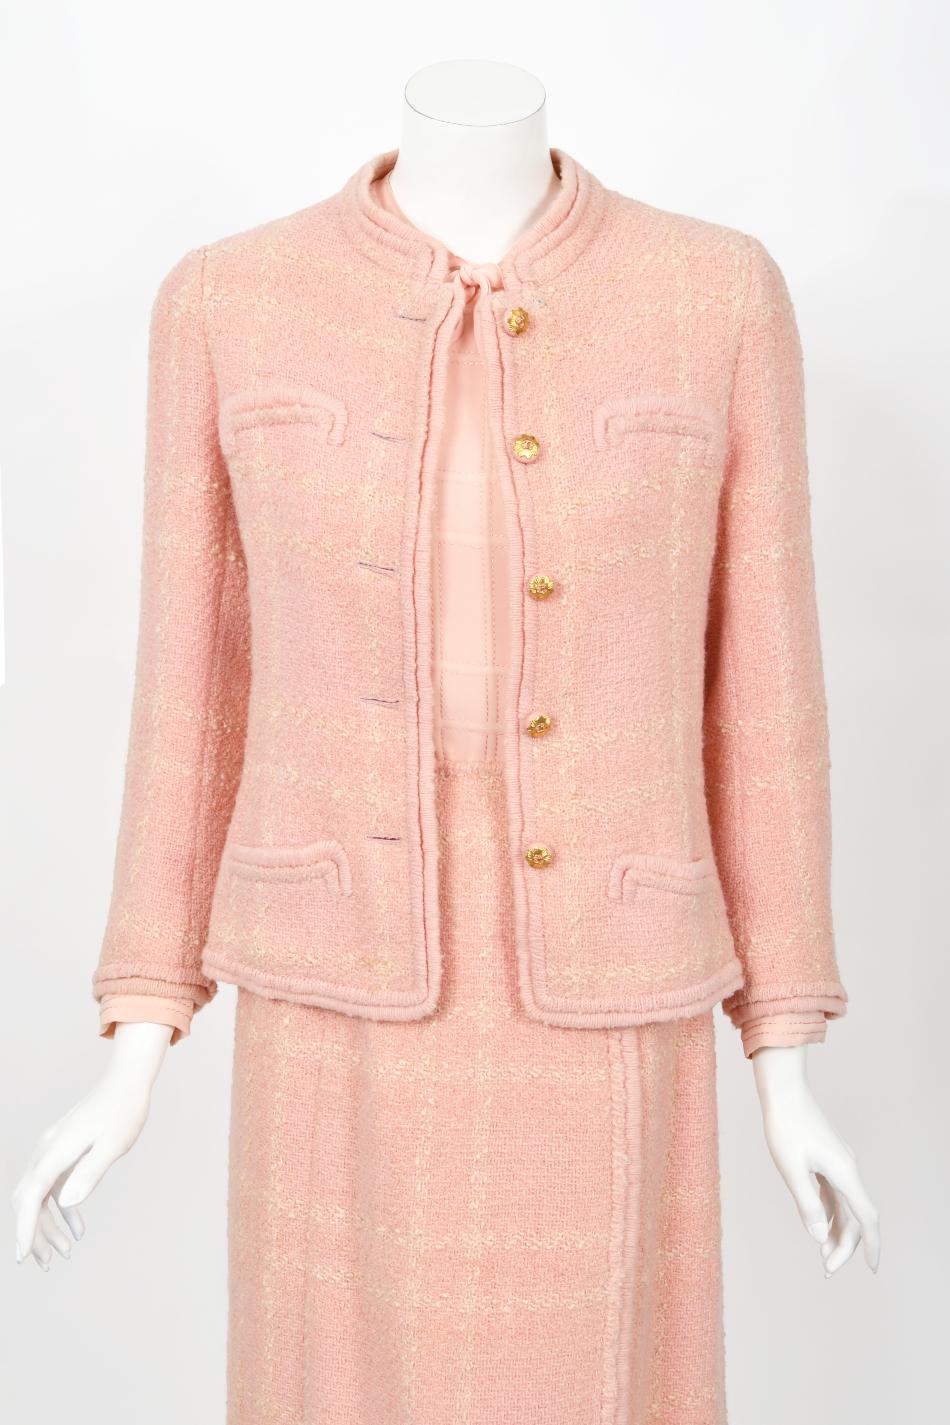 Vintage 1973 Chanel Haute Couture Documented Pink Wool Jacket Blouse Skirt Suit For Sale 1